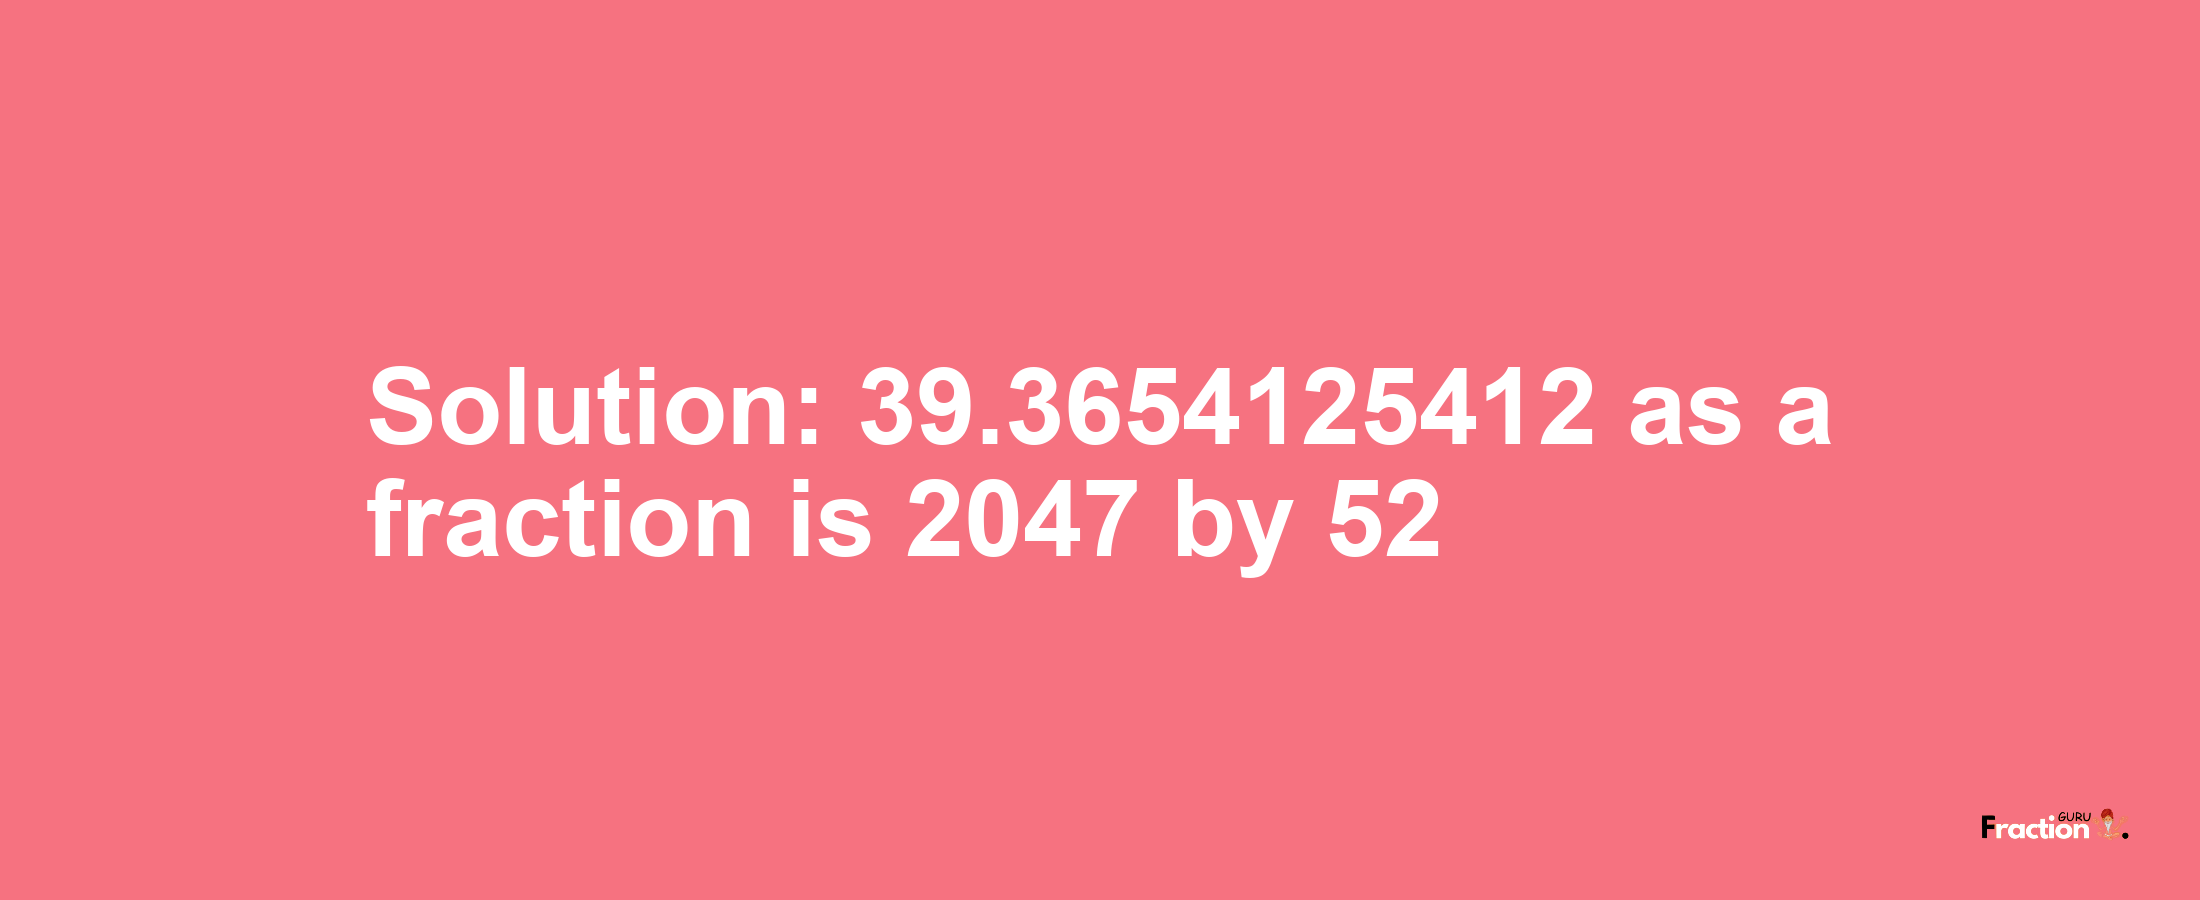 Solution:39.3654125412 as a fraction is 2047/52